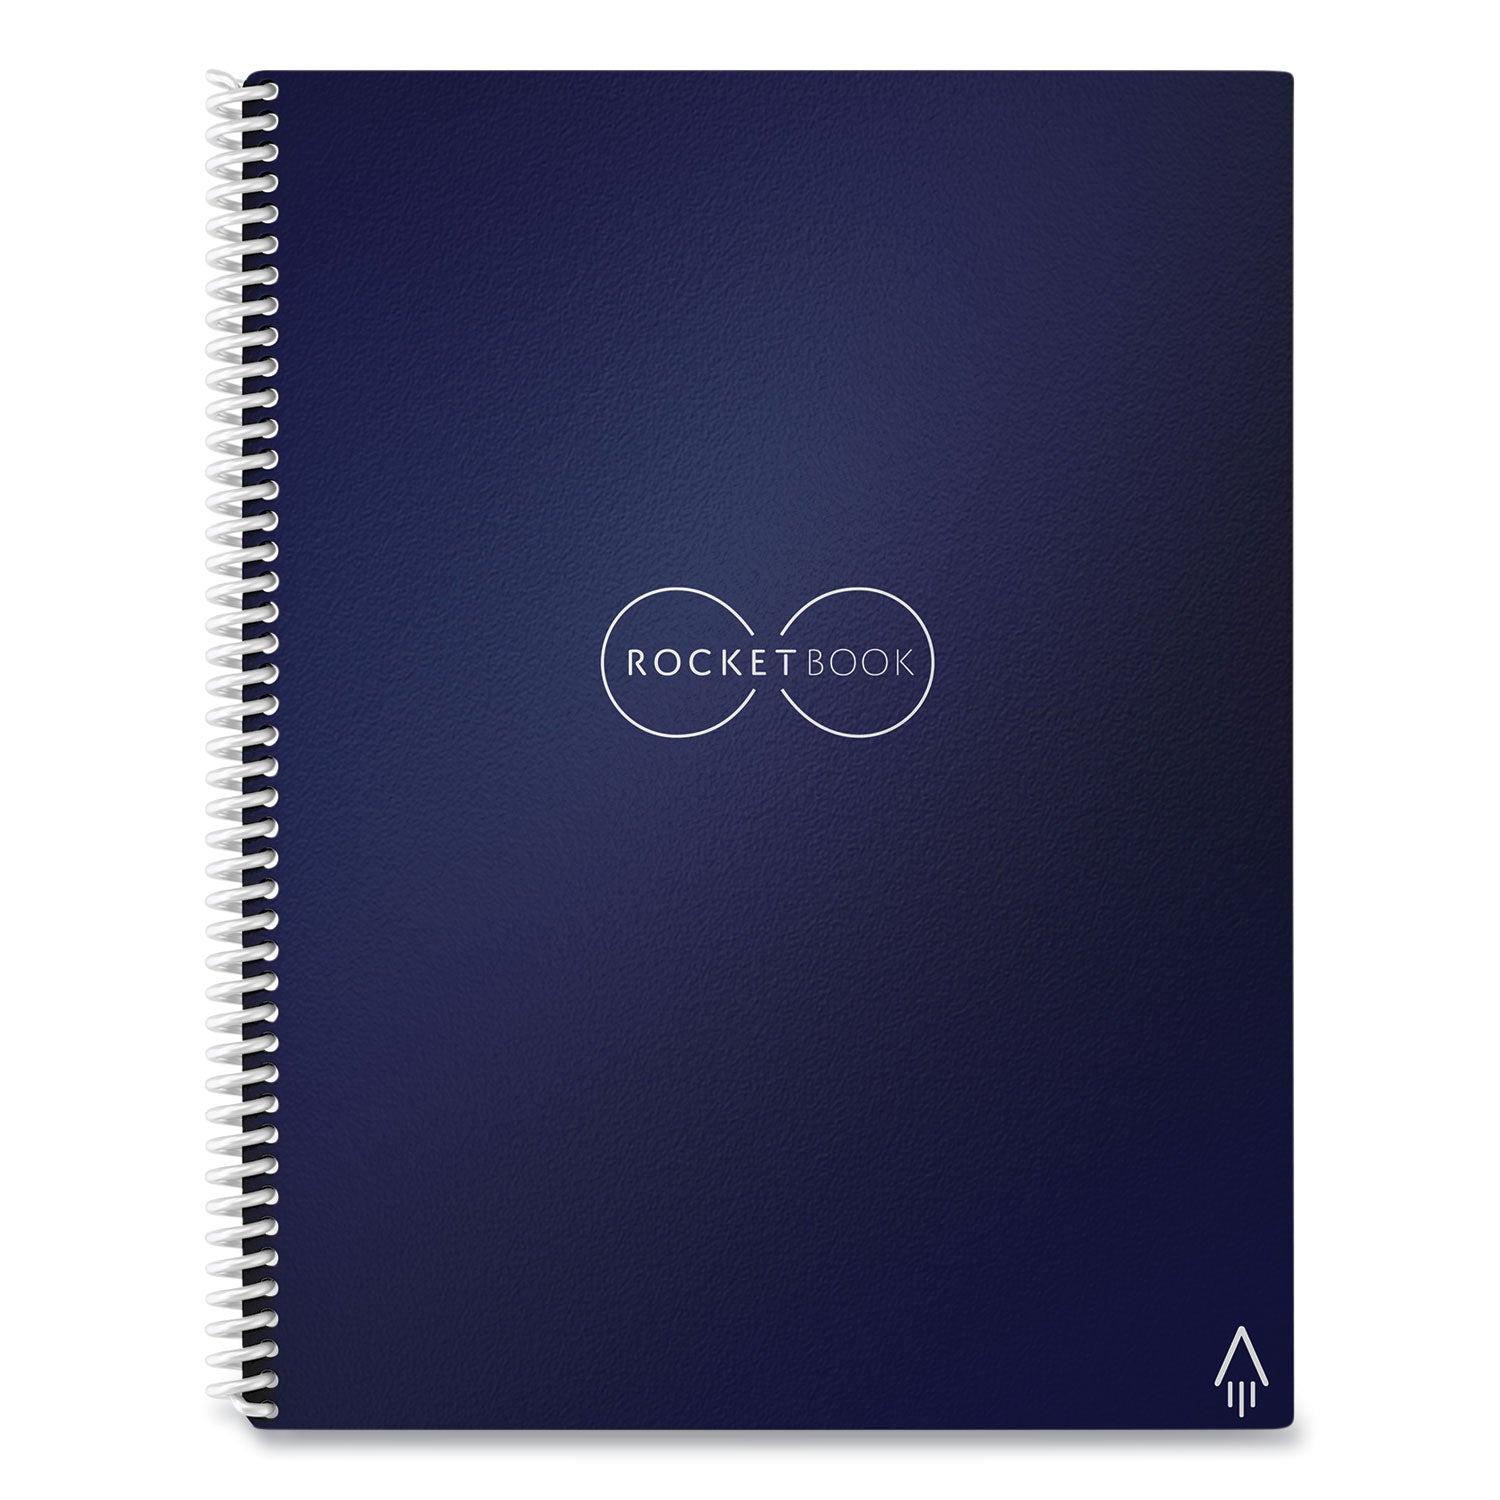 core-smart-notebook-dotted-rule-midnight-blue-cover-16-11-x-85-sheets_rkbevrlrcdf - 2